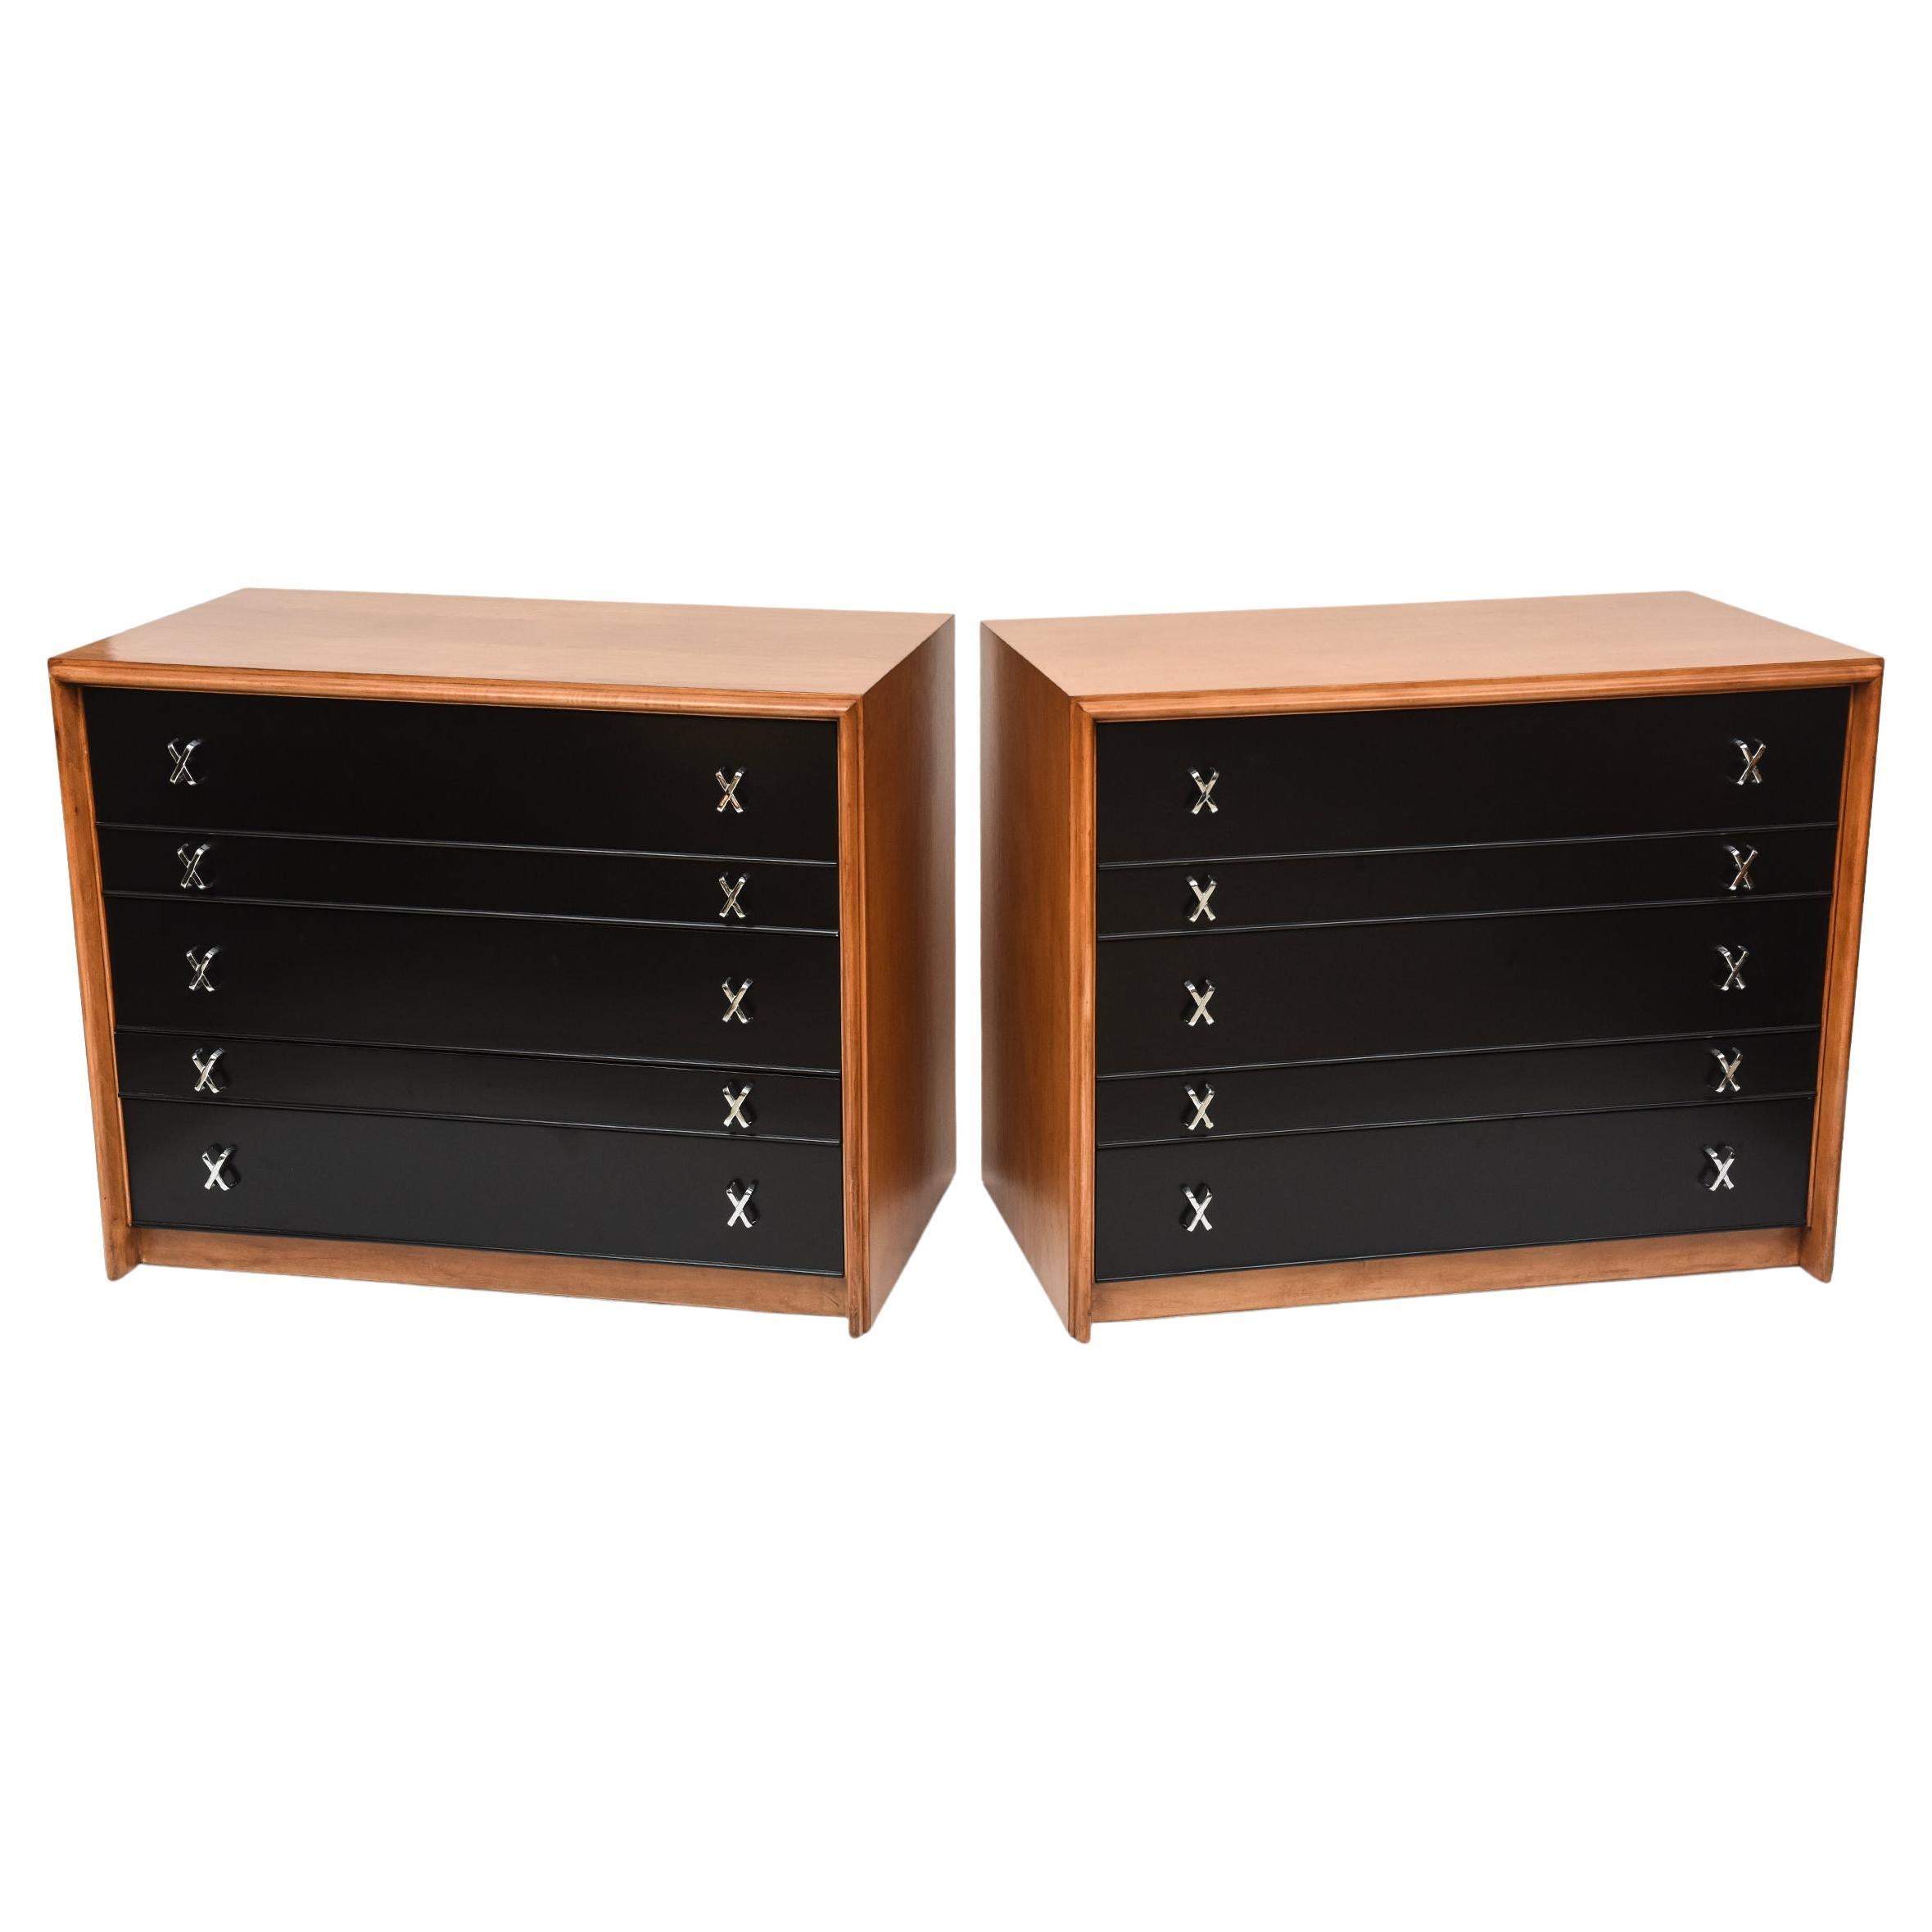 Two timeless 1950s bachelor chests by Paul Frankl for Paul Stuart. The original walnut finish with contrasting black drawers give this eye-catching pair an added versatility in many different settings. Alternating deep and shallow drawers and